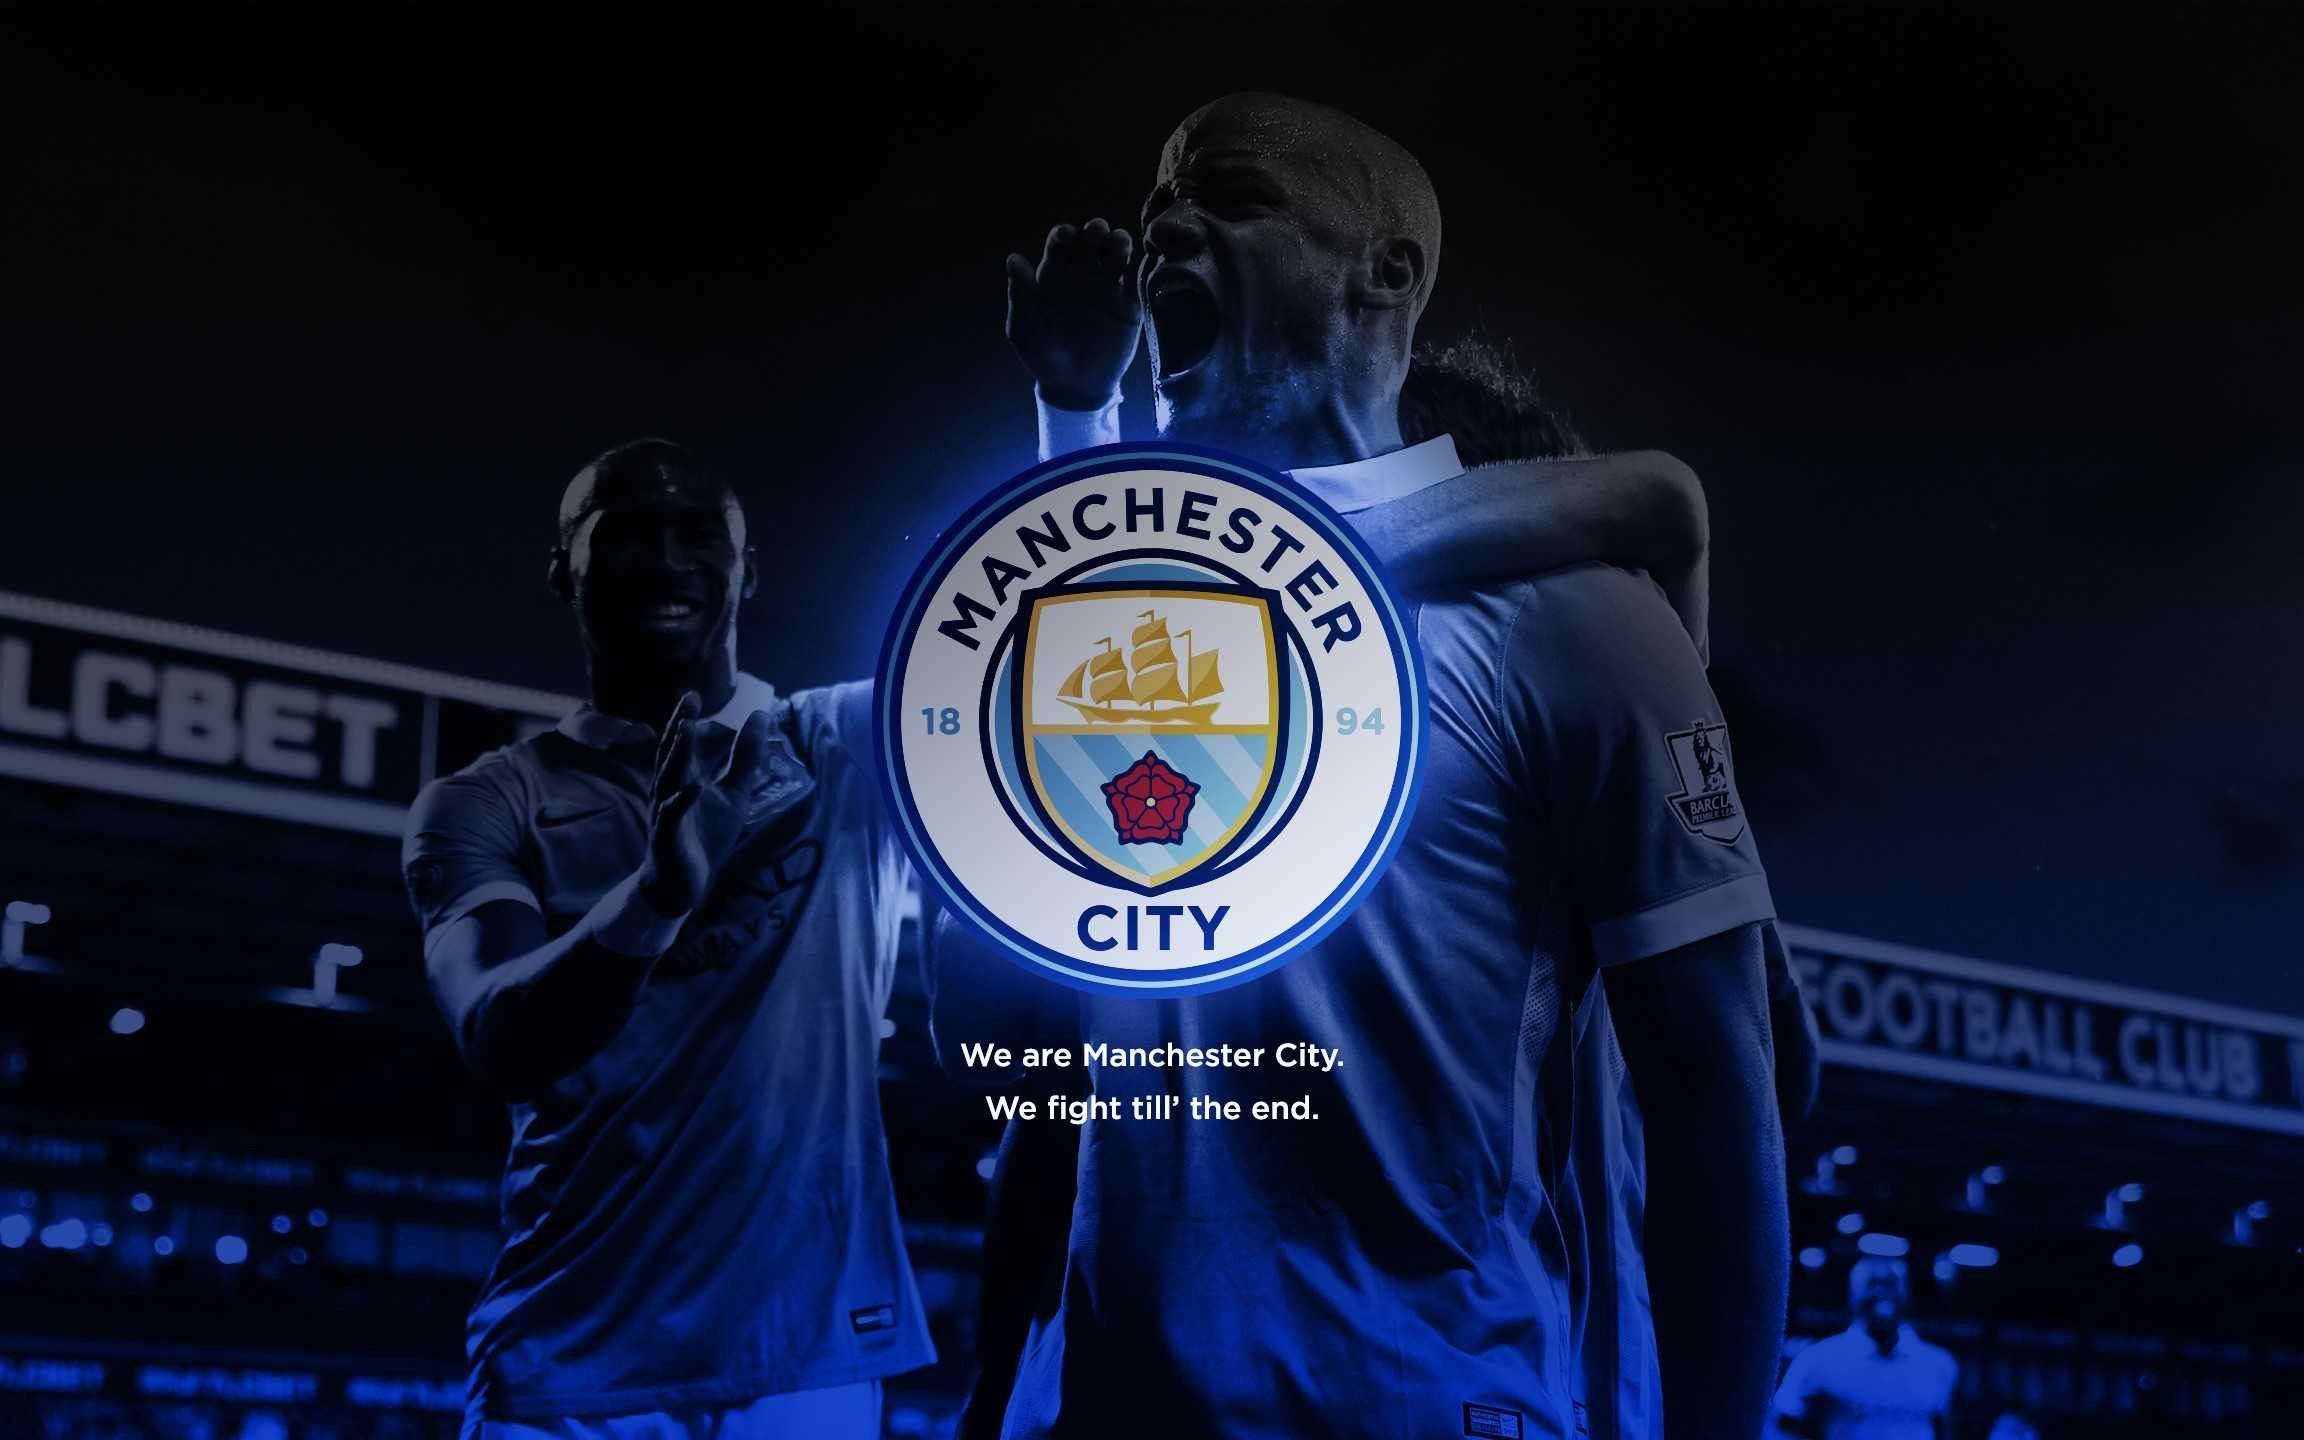 4k PC Manchester City Wallpapers - Wallpaper Cave